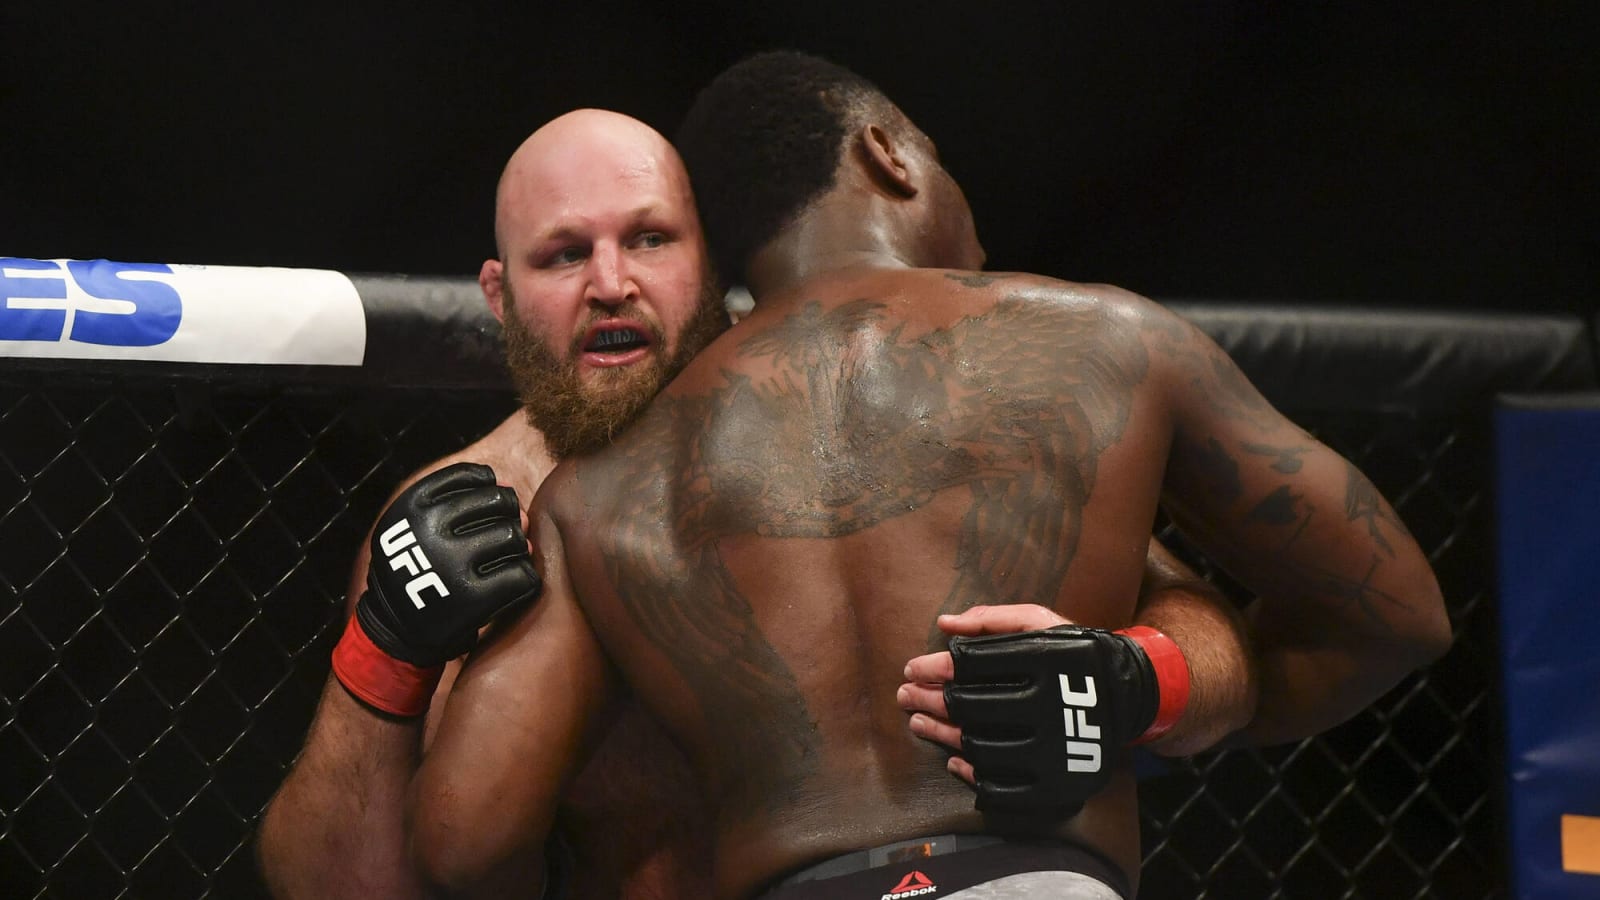 Ben Rothwell released, match vs. Alexander Gustafsson scratched